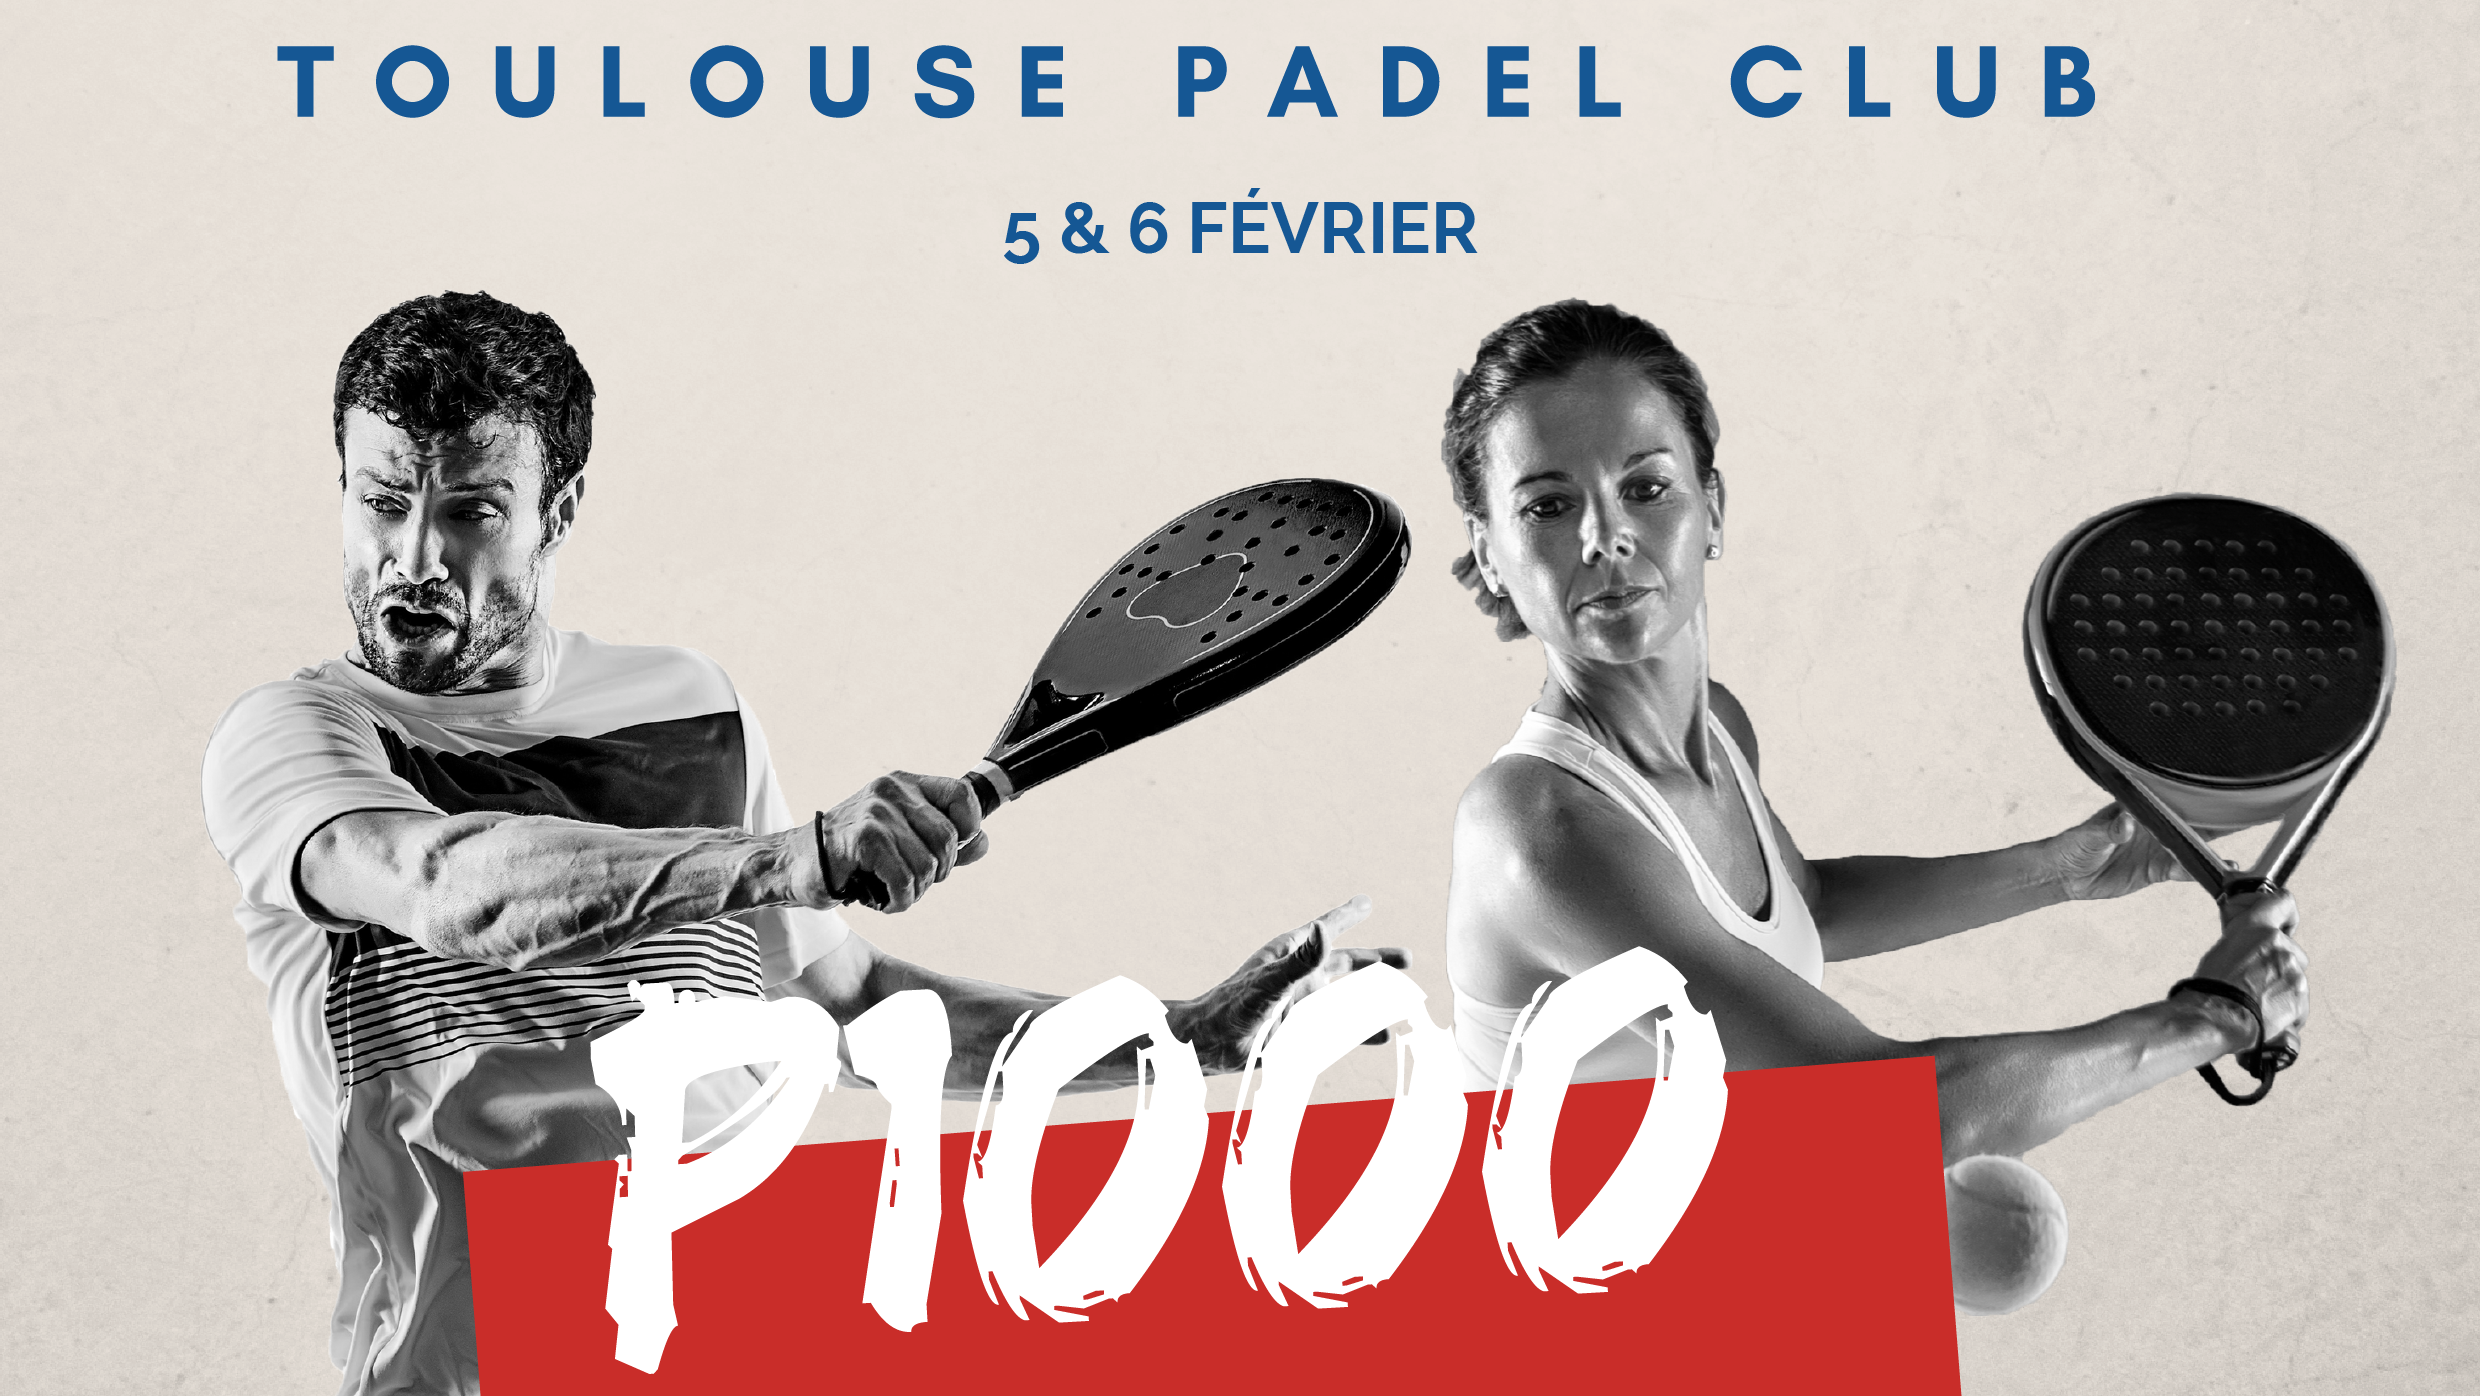 Toulouse Padel Club: P1000 M and F on February 5 and 6, 2022